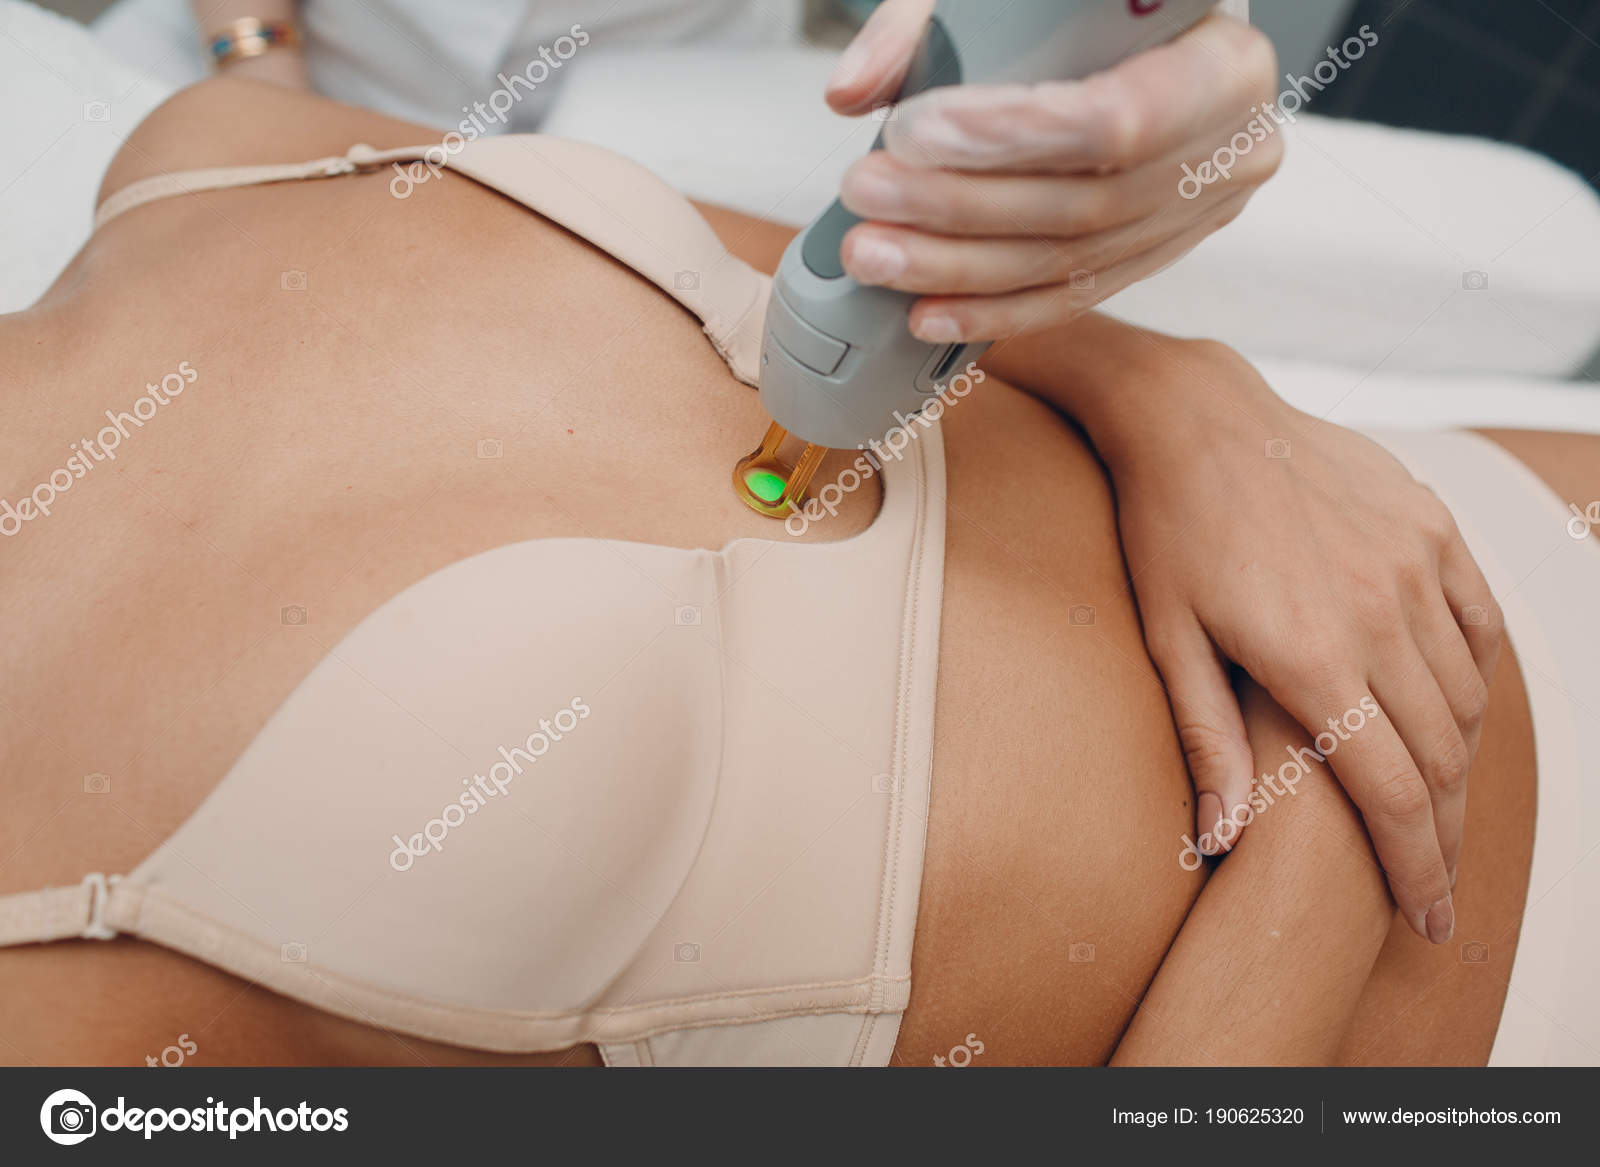 Breast Laser Epilation Cosmetology Hair Removal Cosmetology Procedure Laser  Epilation Stock Photo by © 190625320